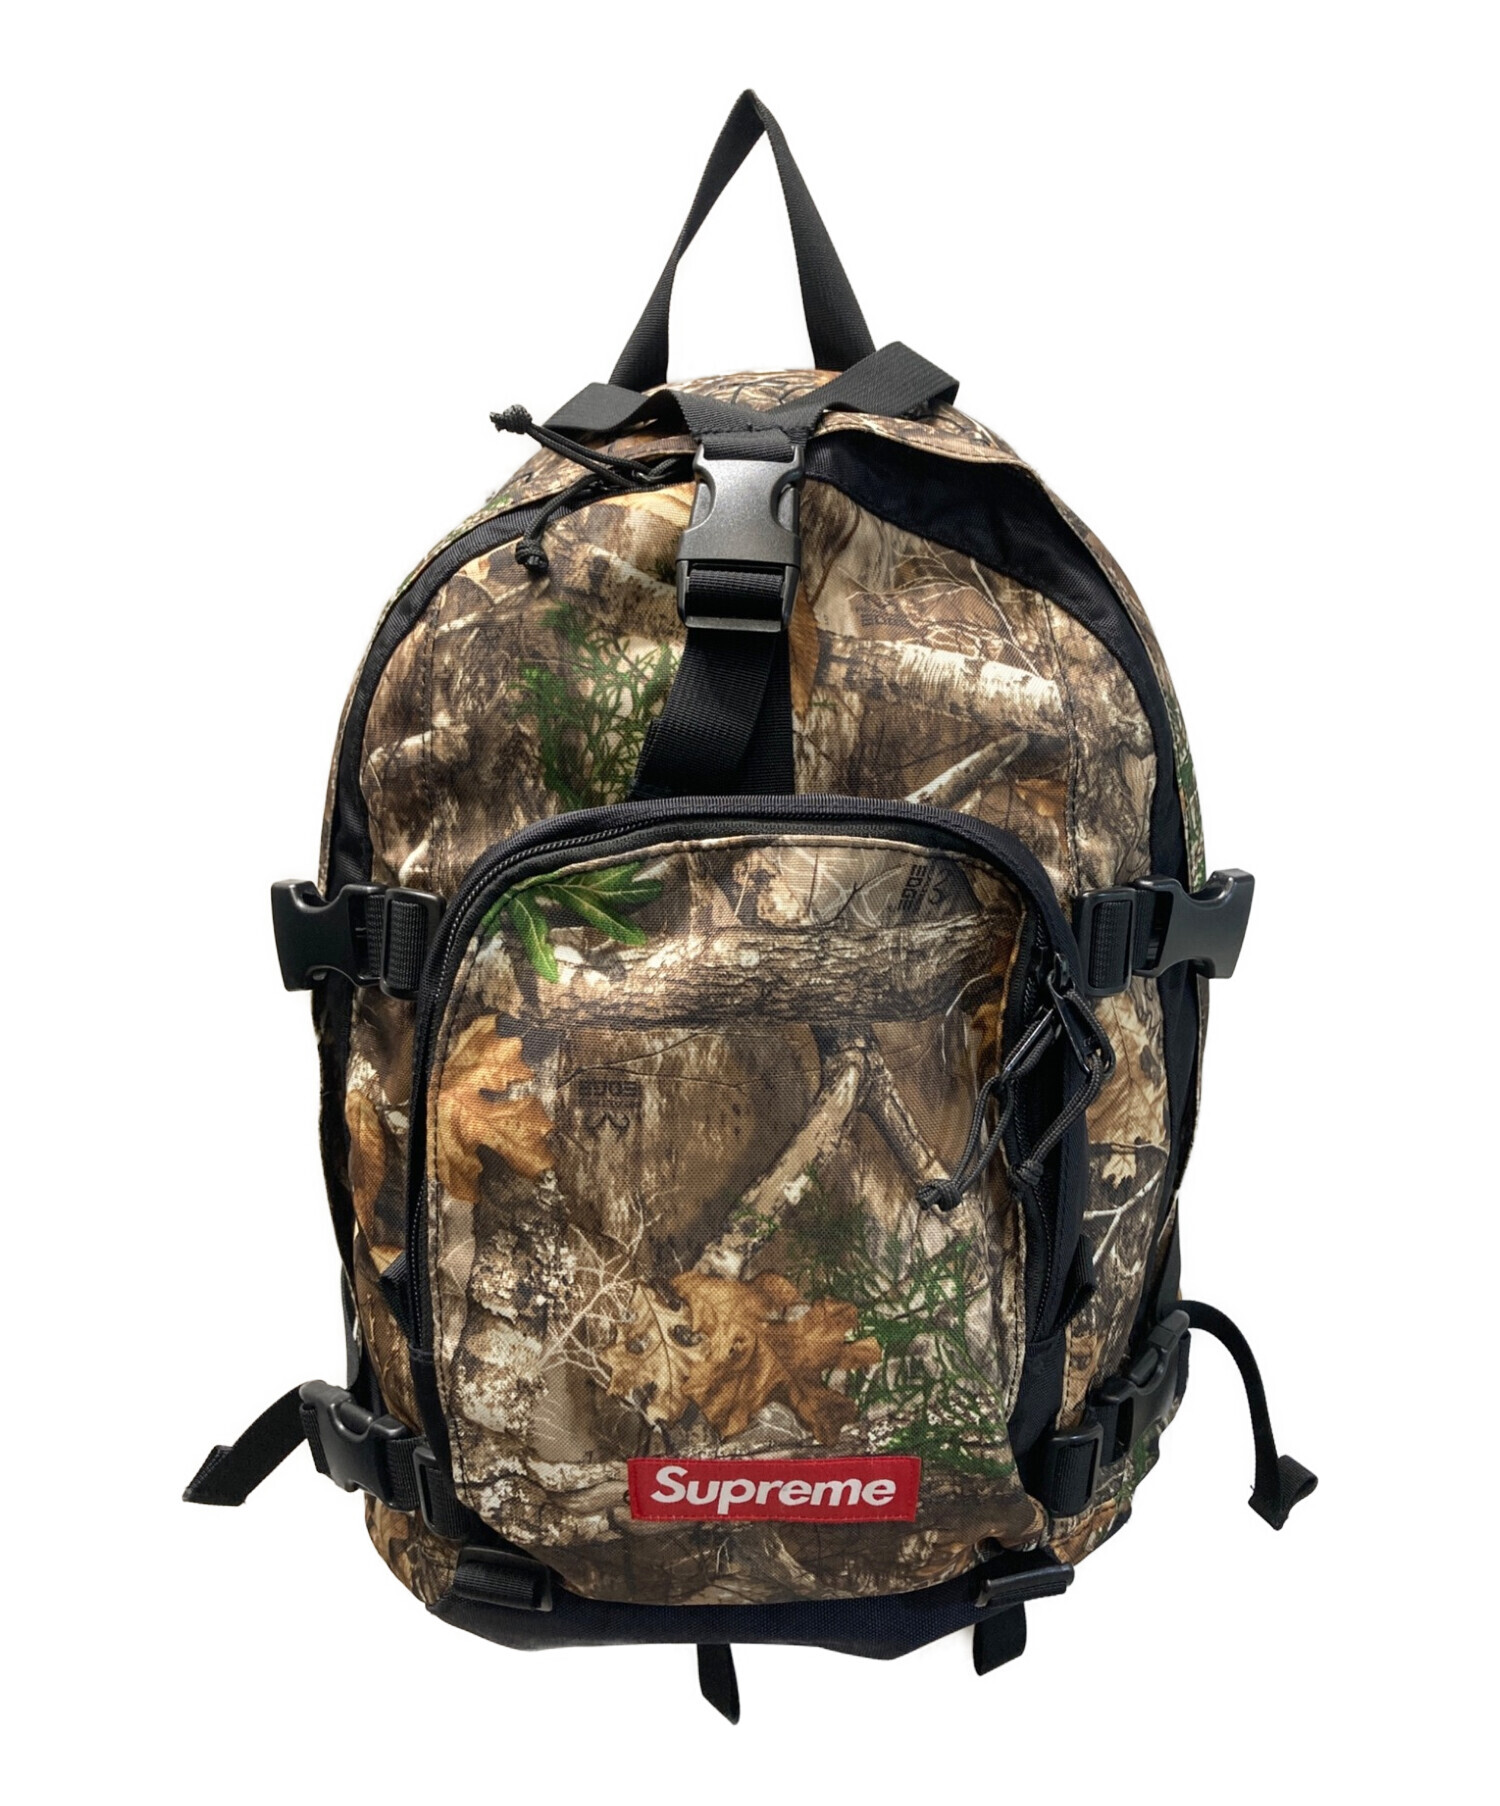 SUPREME シュプリーム 19AW Backpack Real Tree Camo リアルツリーカモ バックパック カーキ